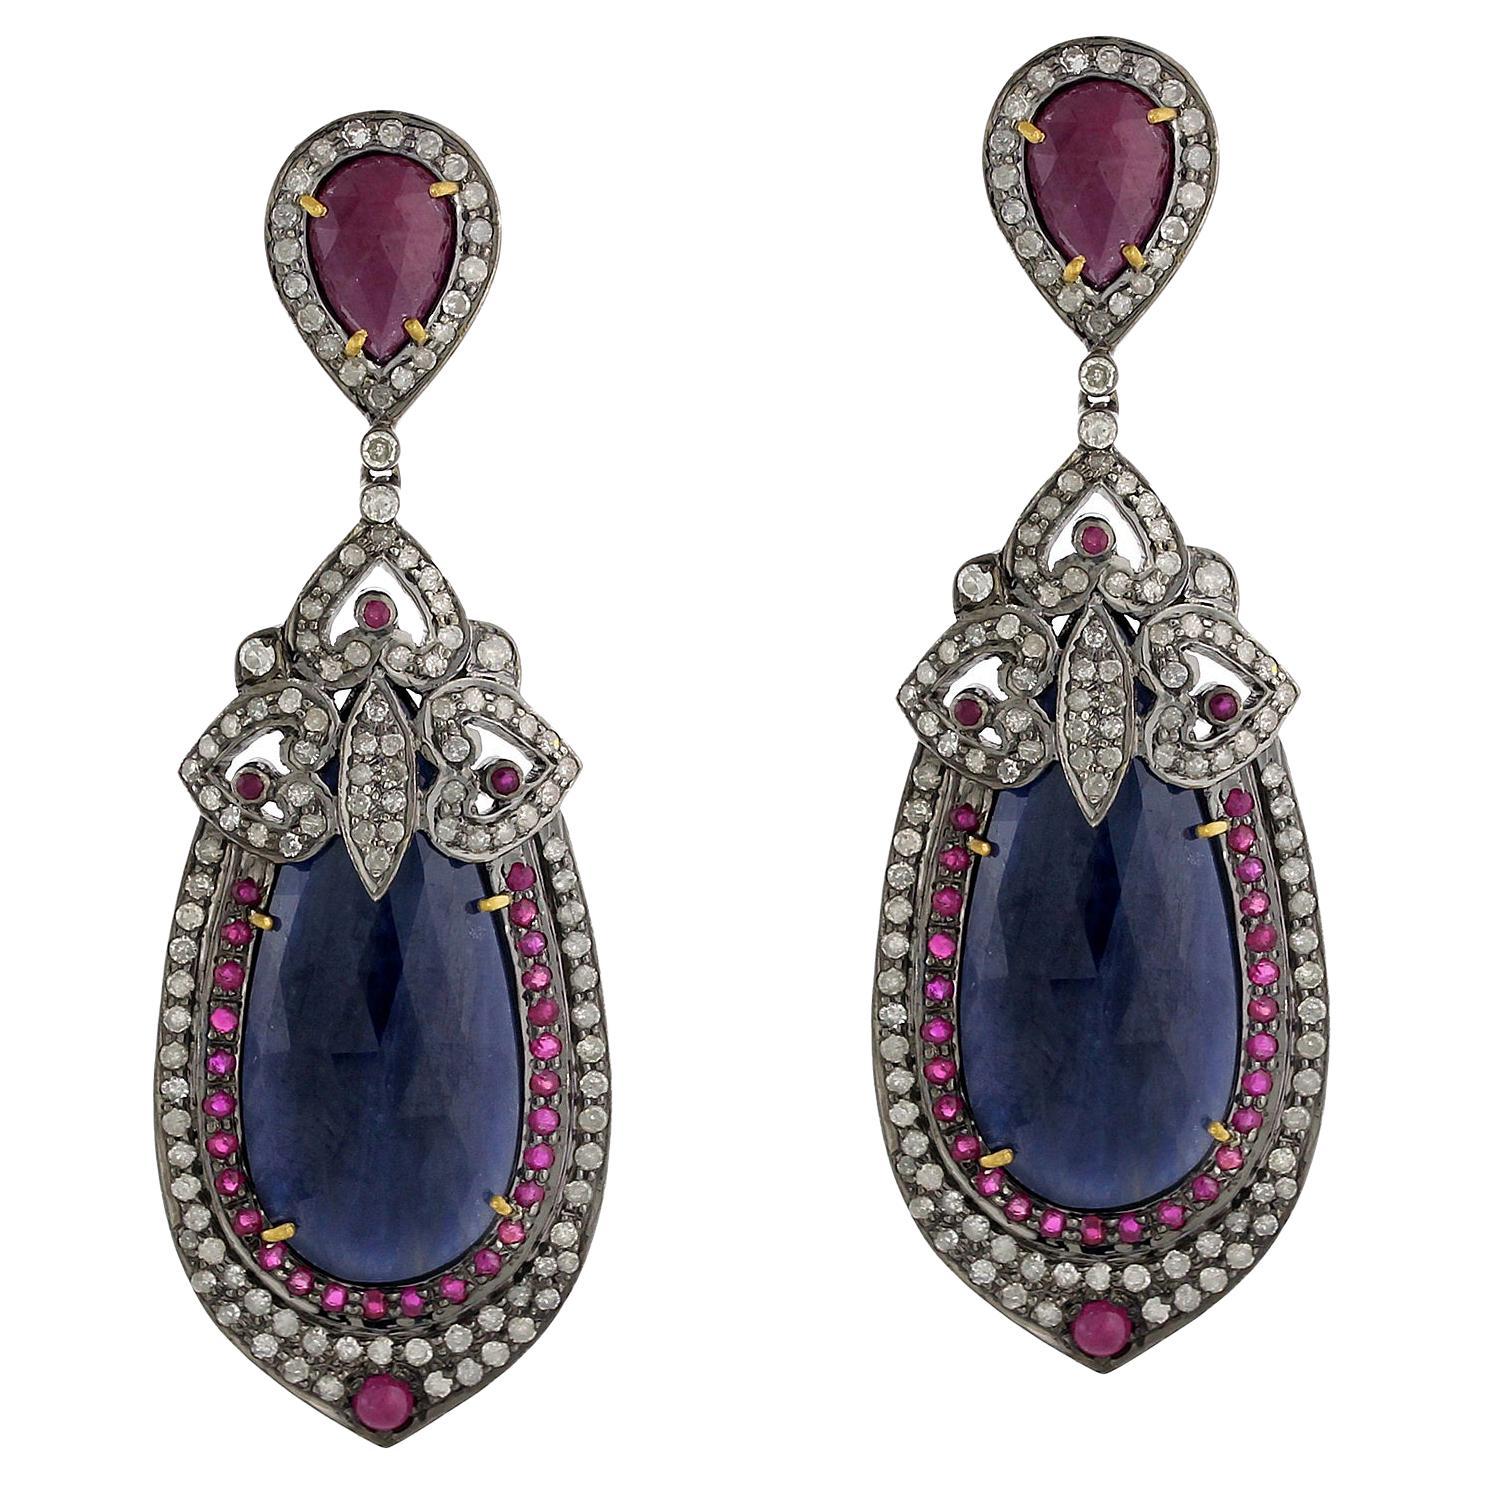 Pear Shaped Blue Sapphire Earrings with Ruby & Pave Diamond in 18k Gold & Silver